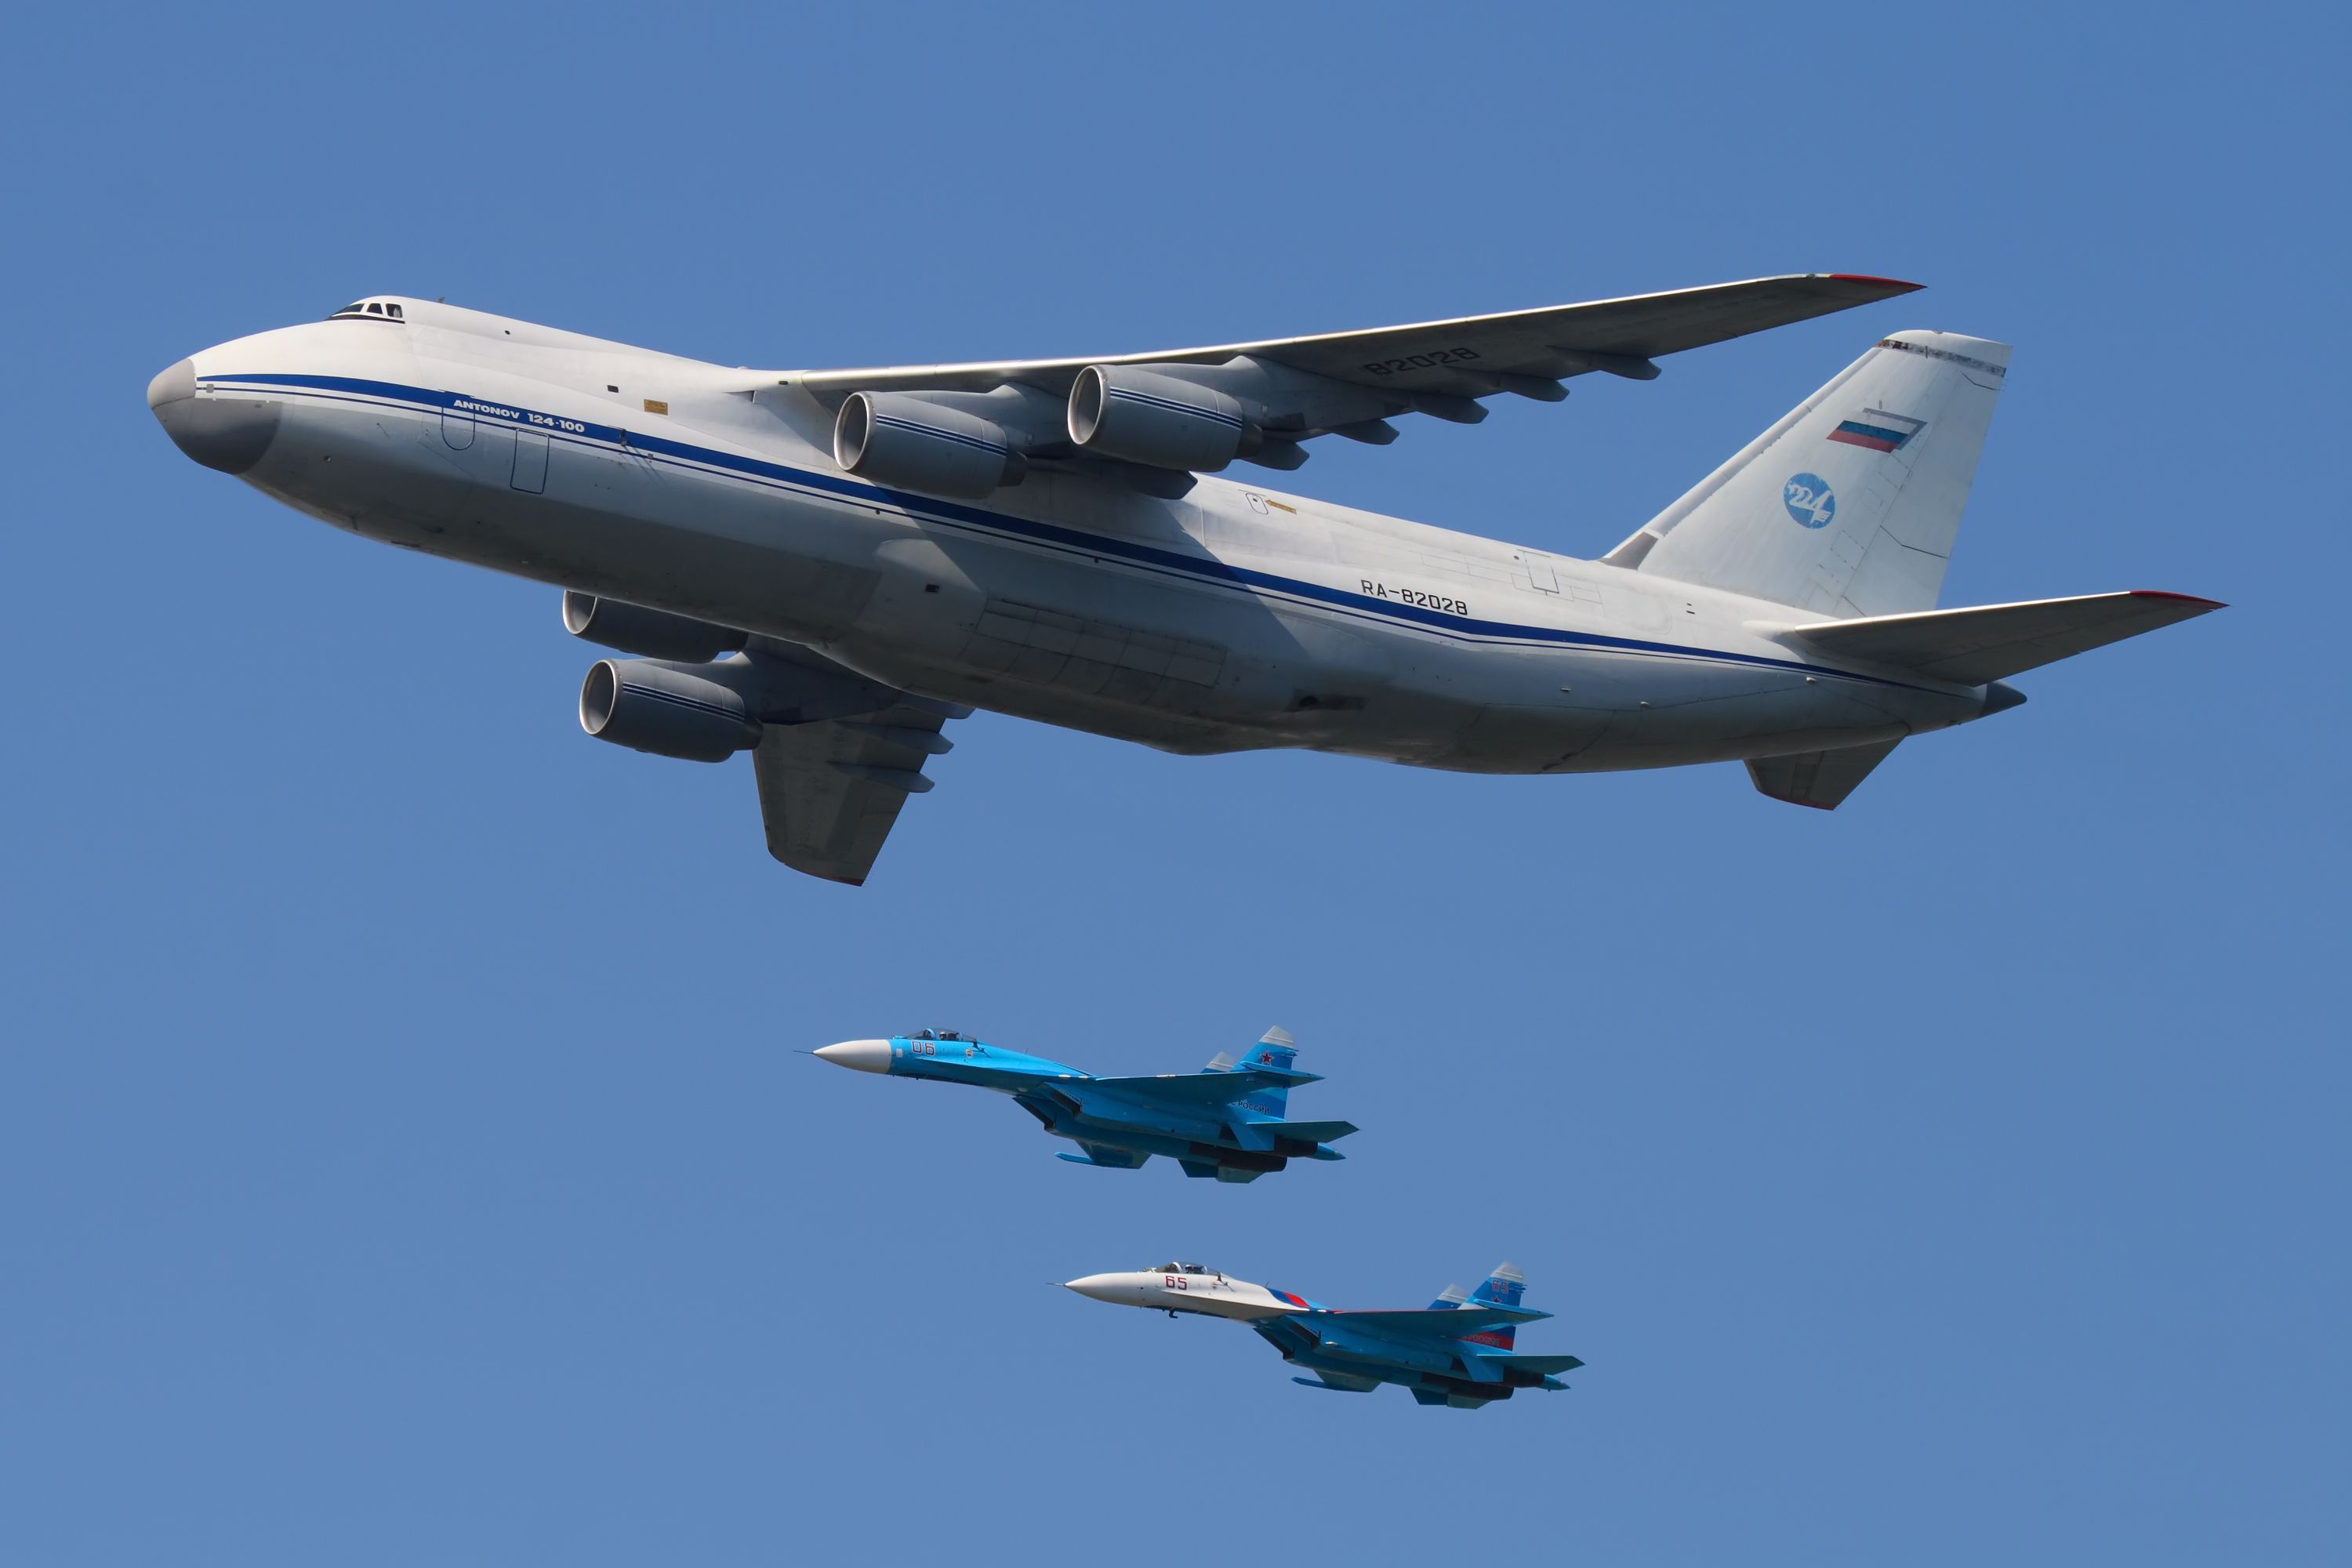 An-124_RA-82028_in_formation_with_Su-27_09-May-2010